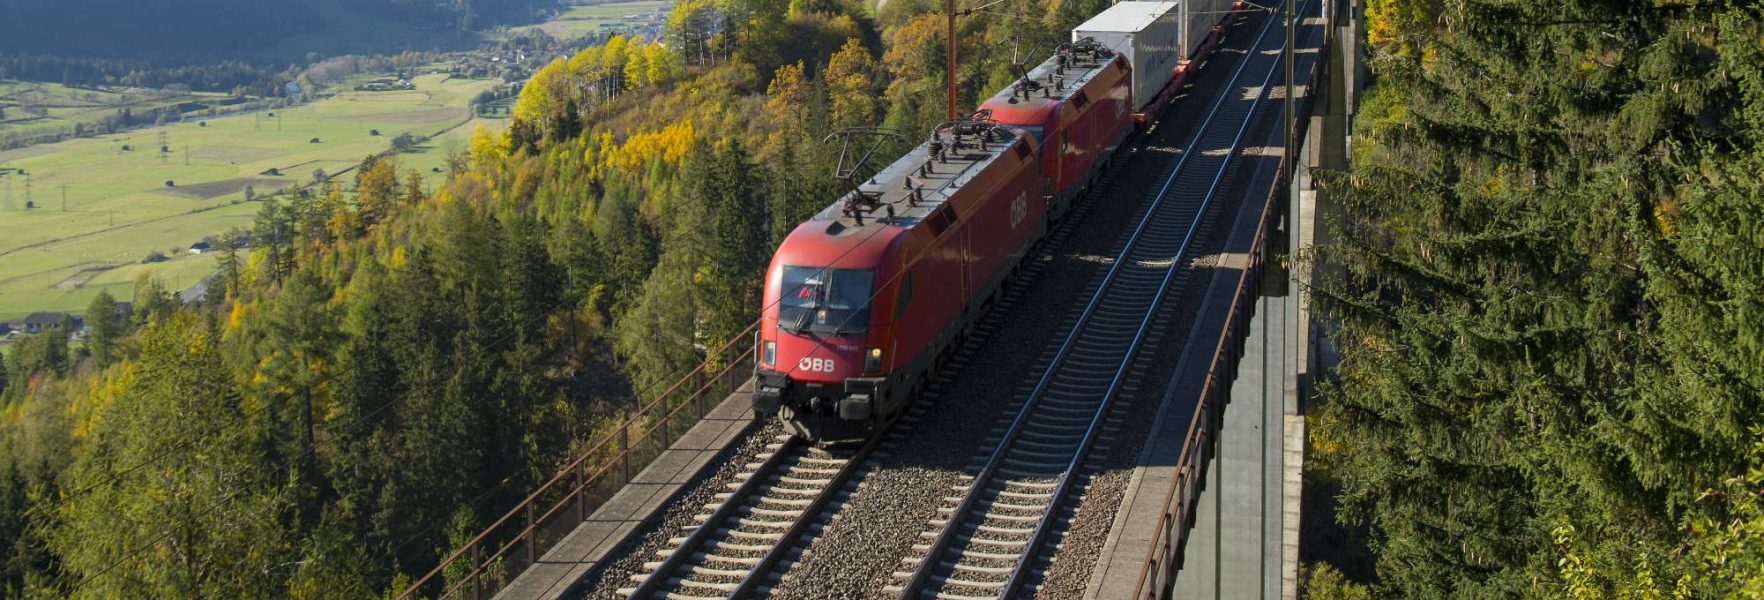 Freight trains become smart